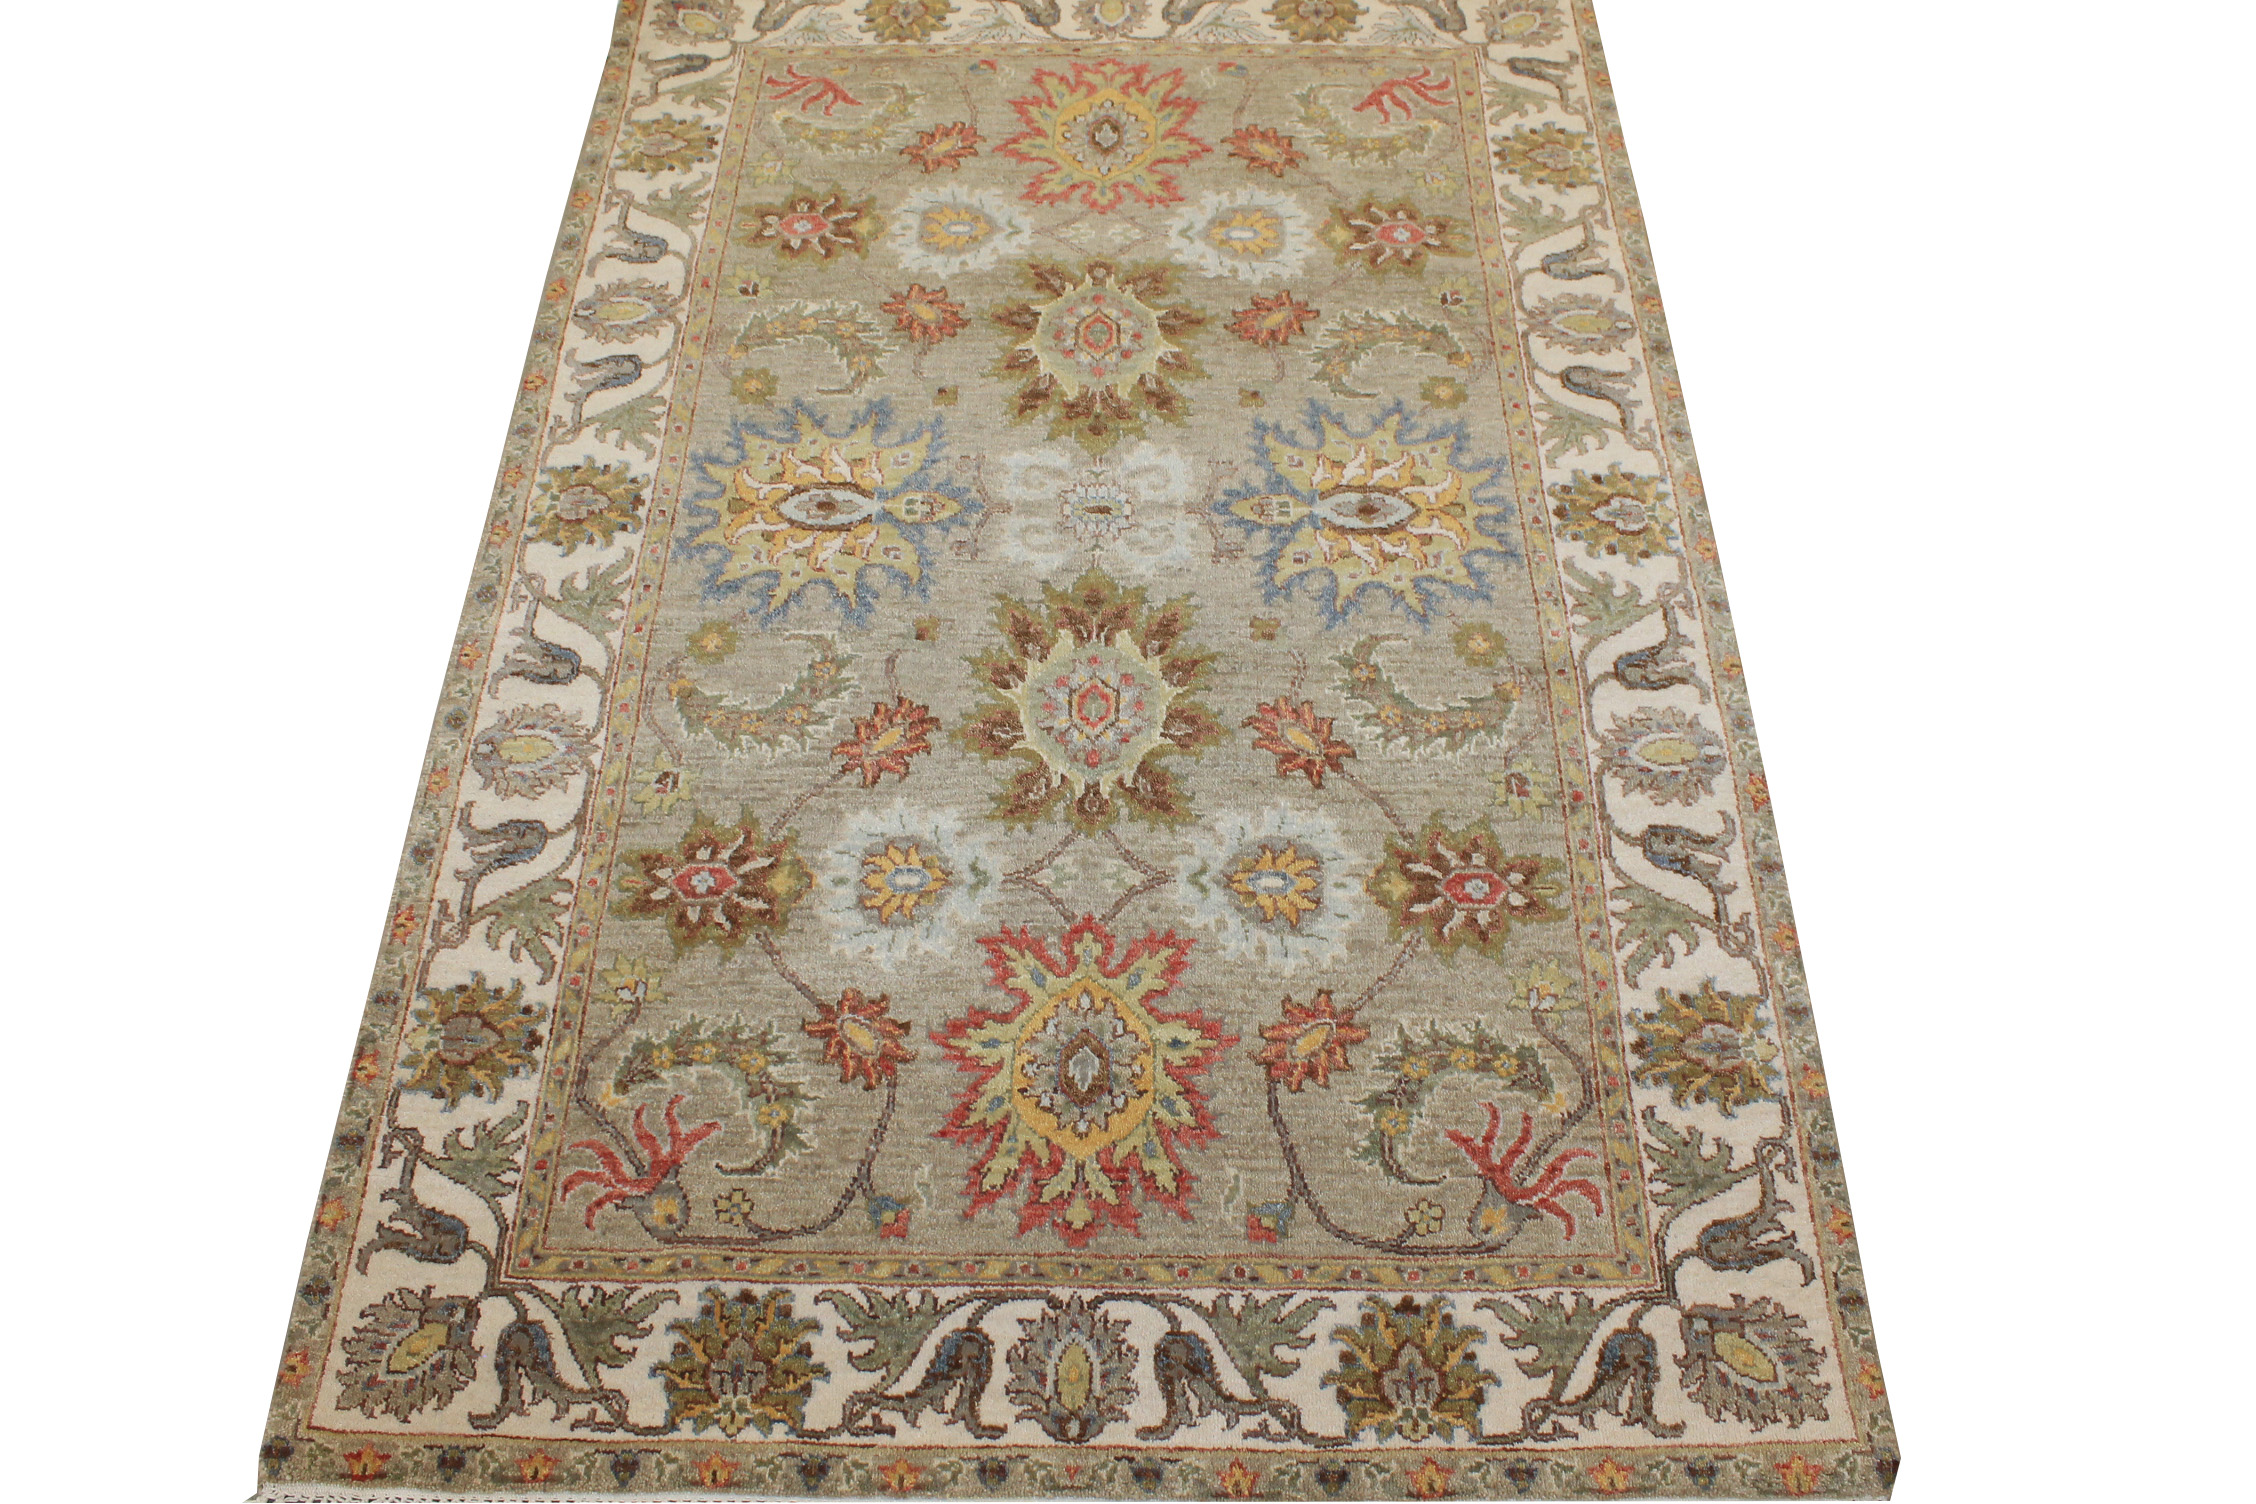 4x6 Traditional Hand Knotted Wool Area Rug - MR028209